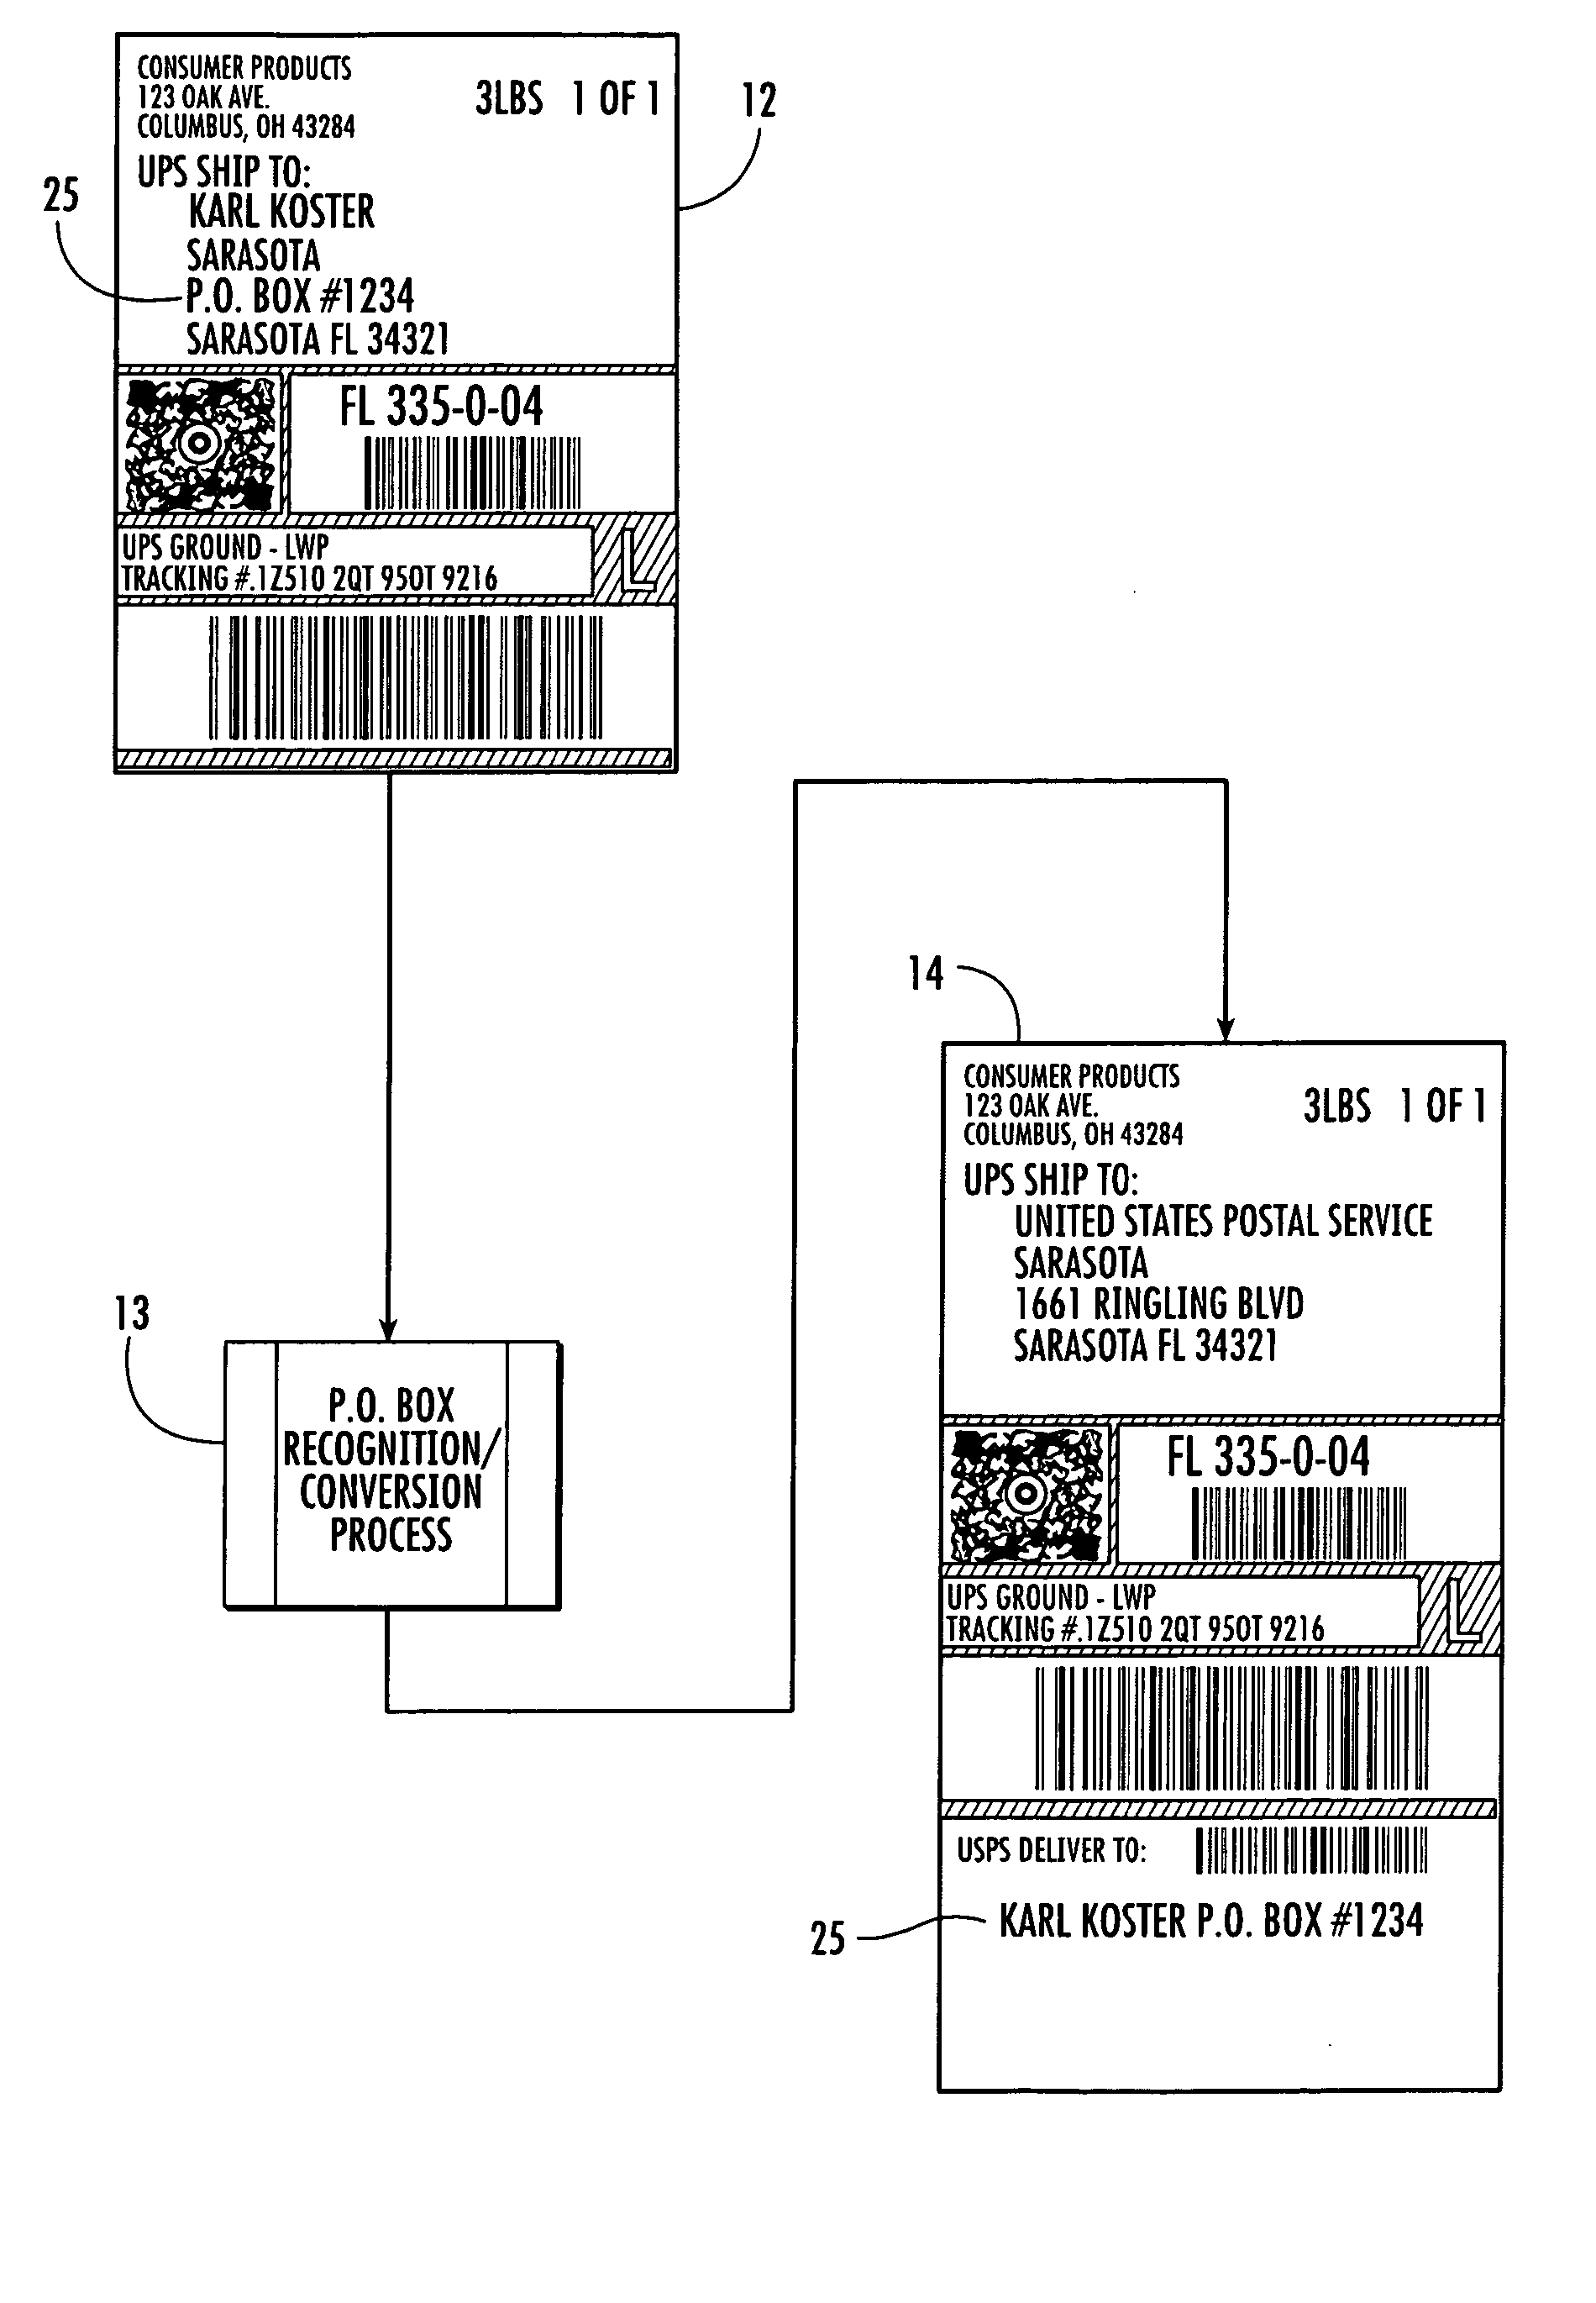 System and method for shipping a mail piece having post office box recognition